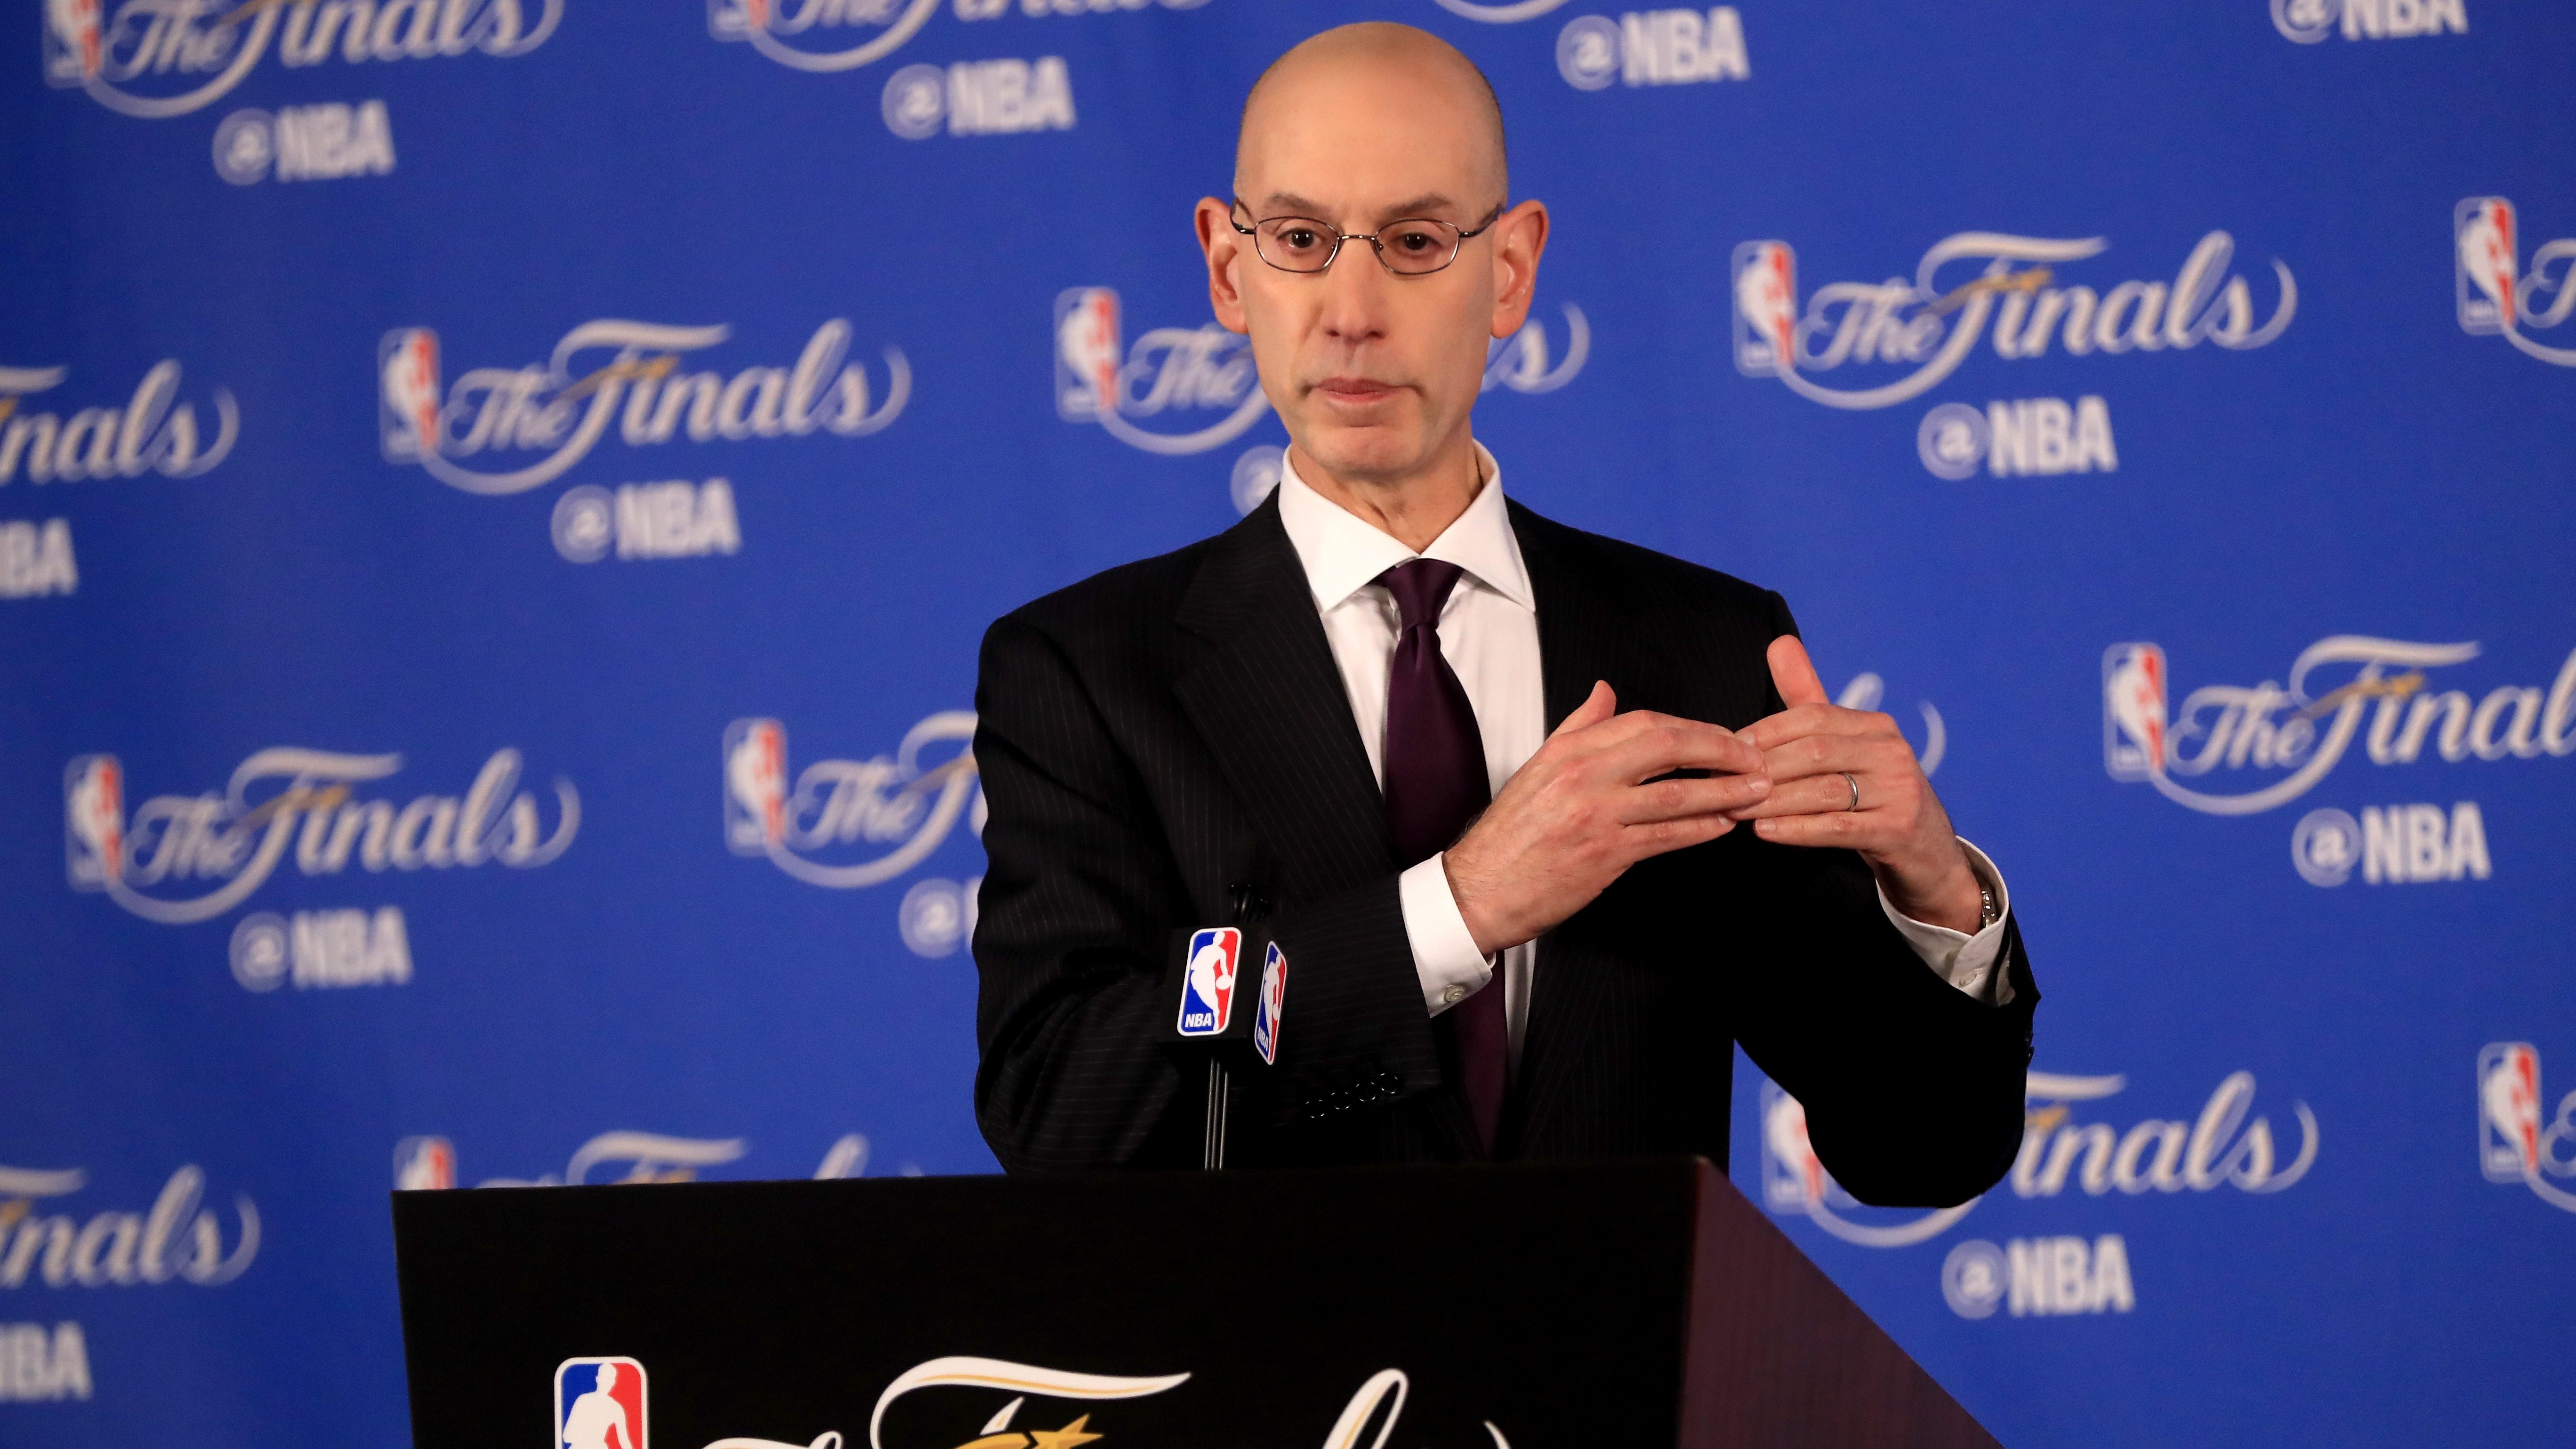 The Nba Hopes To Recoup Revenue In The Bubble At Disney World Marketplace